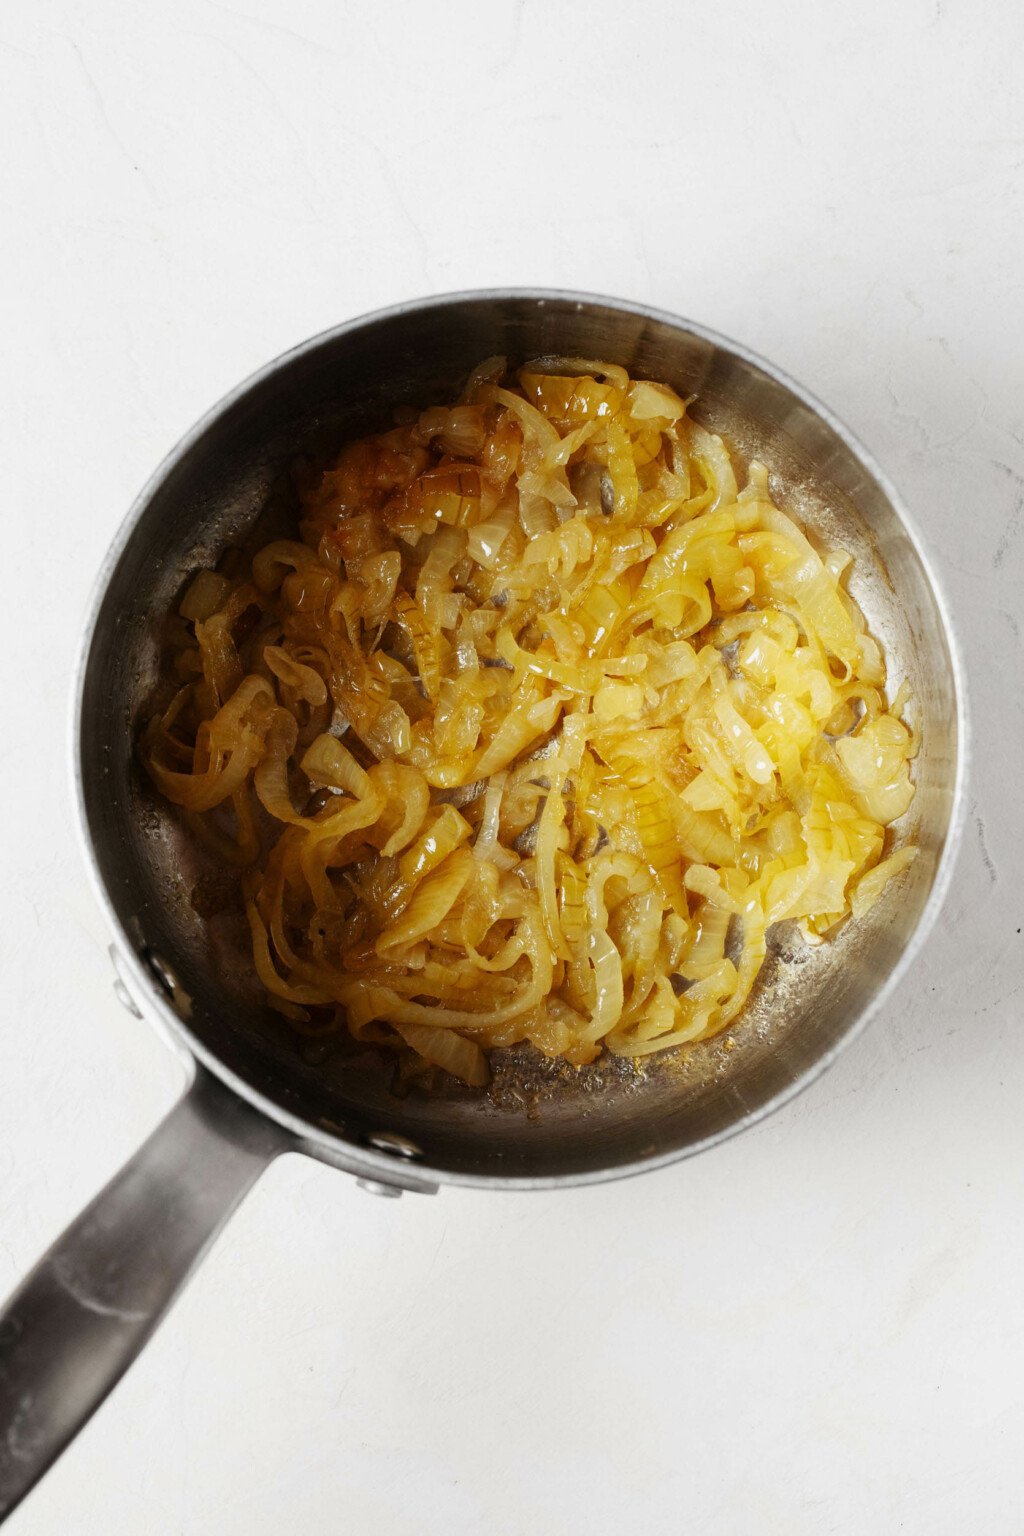 An overhead image of a silver soup pot, which is being used to caramelize onions.